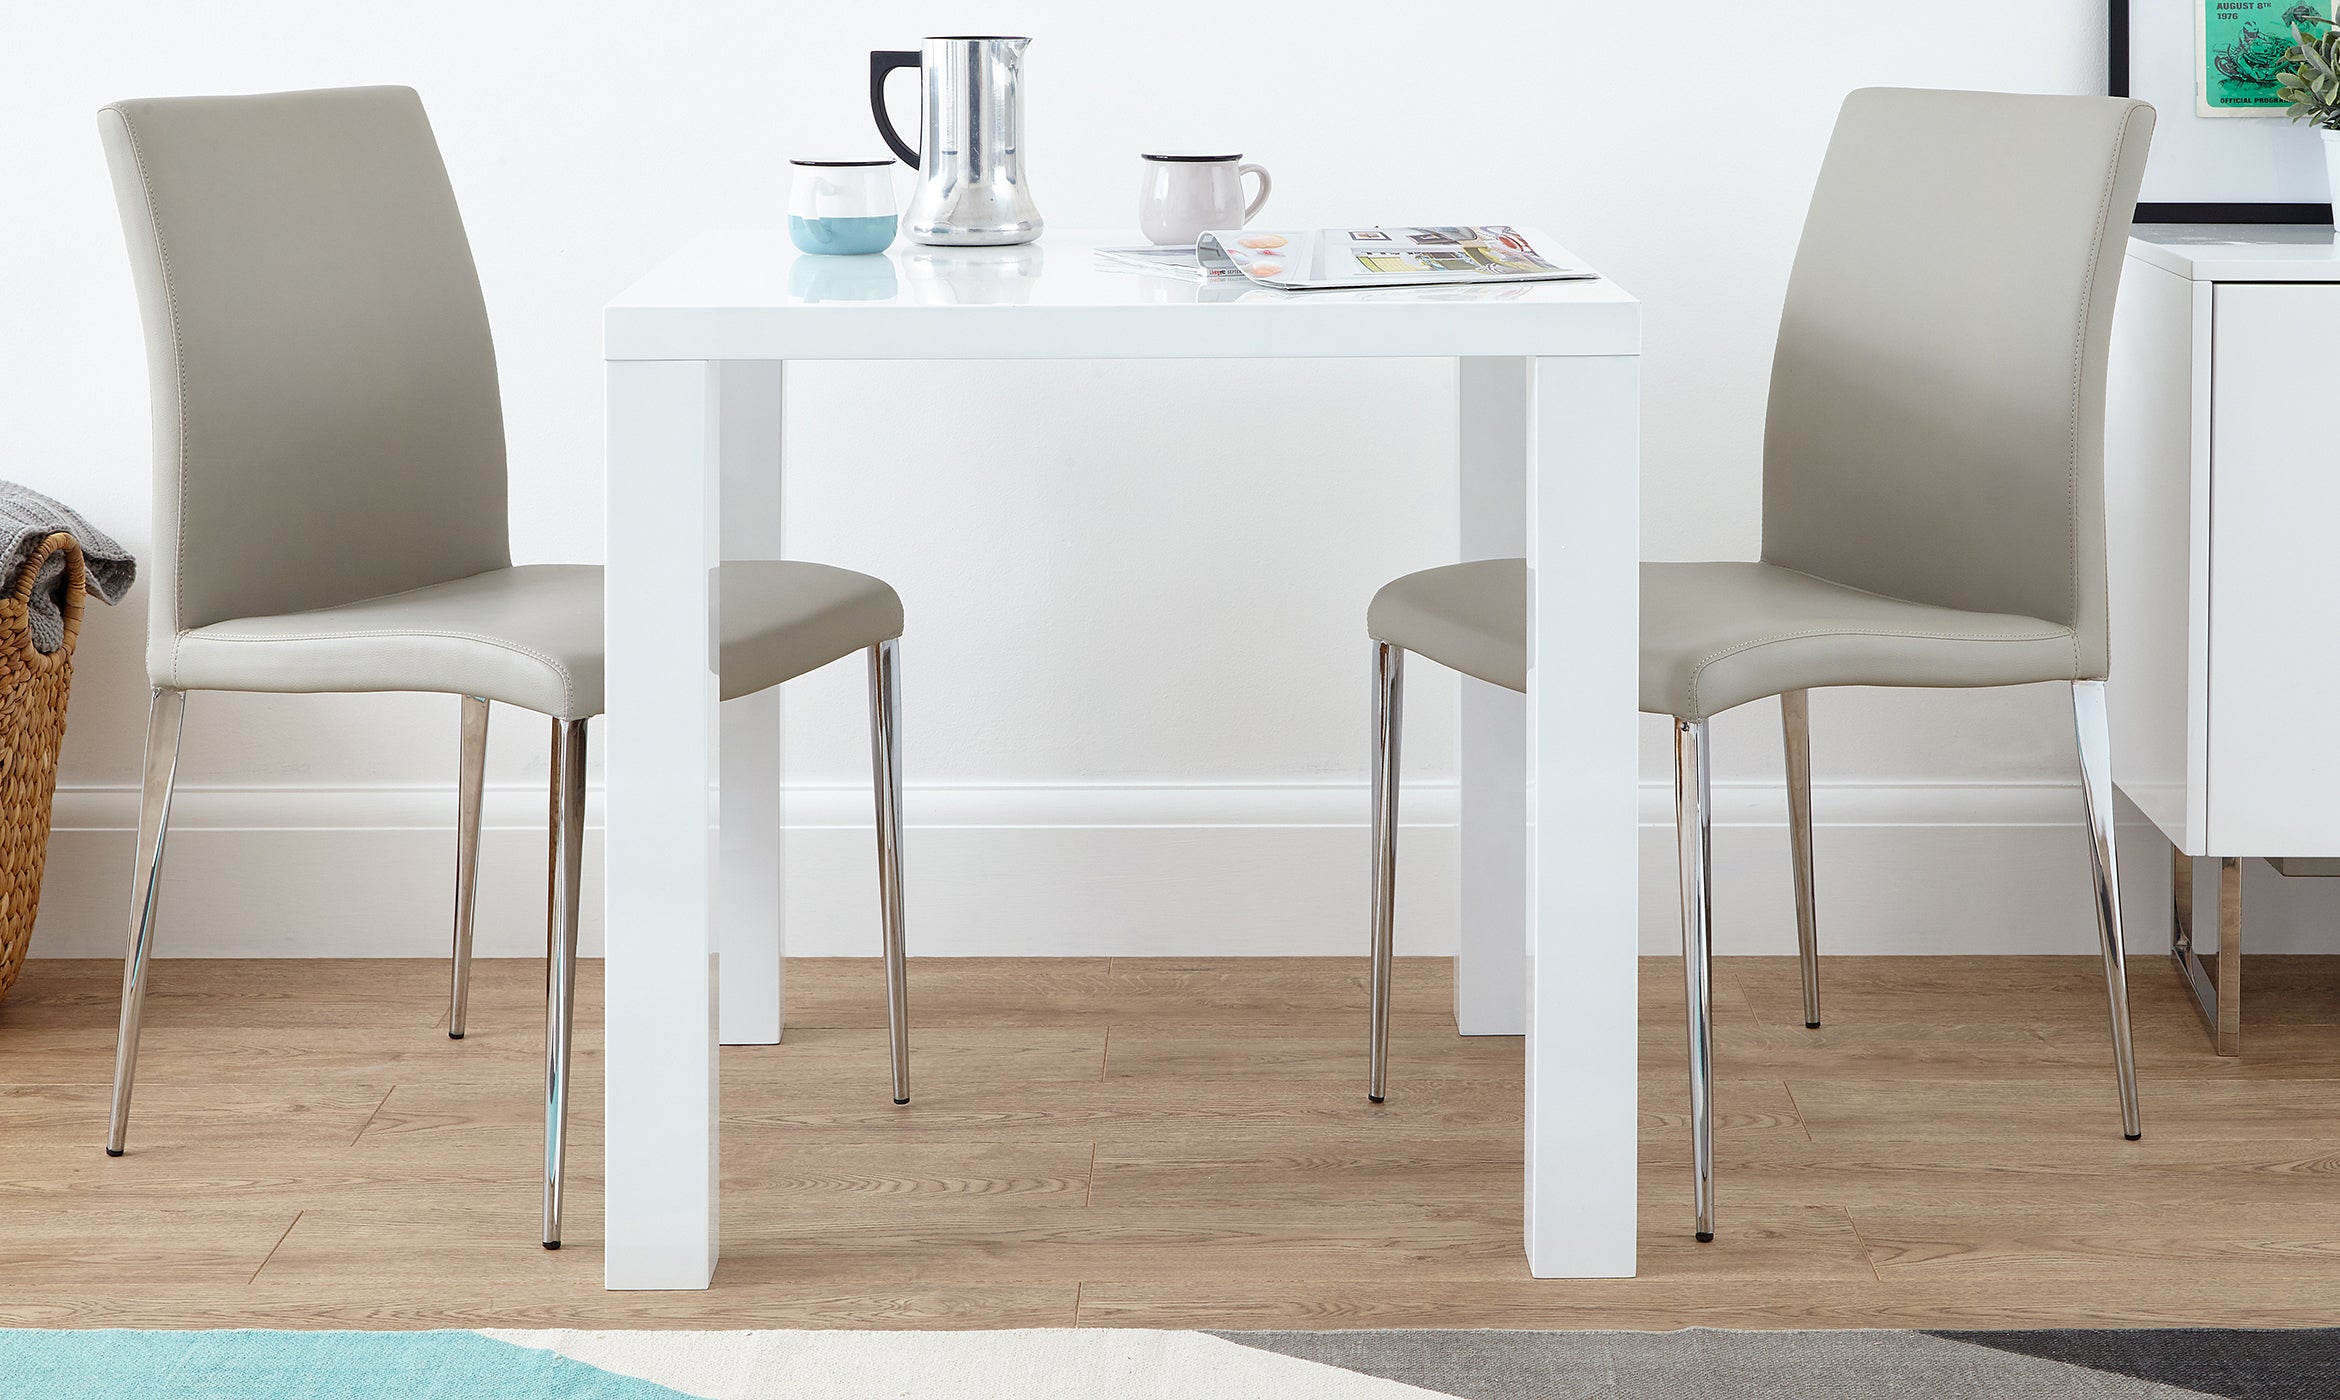 Contemporary Casa White Gloss Extending Dining Table – Product of the Week